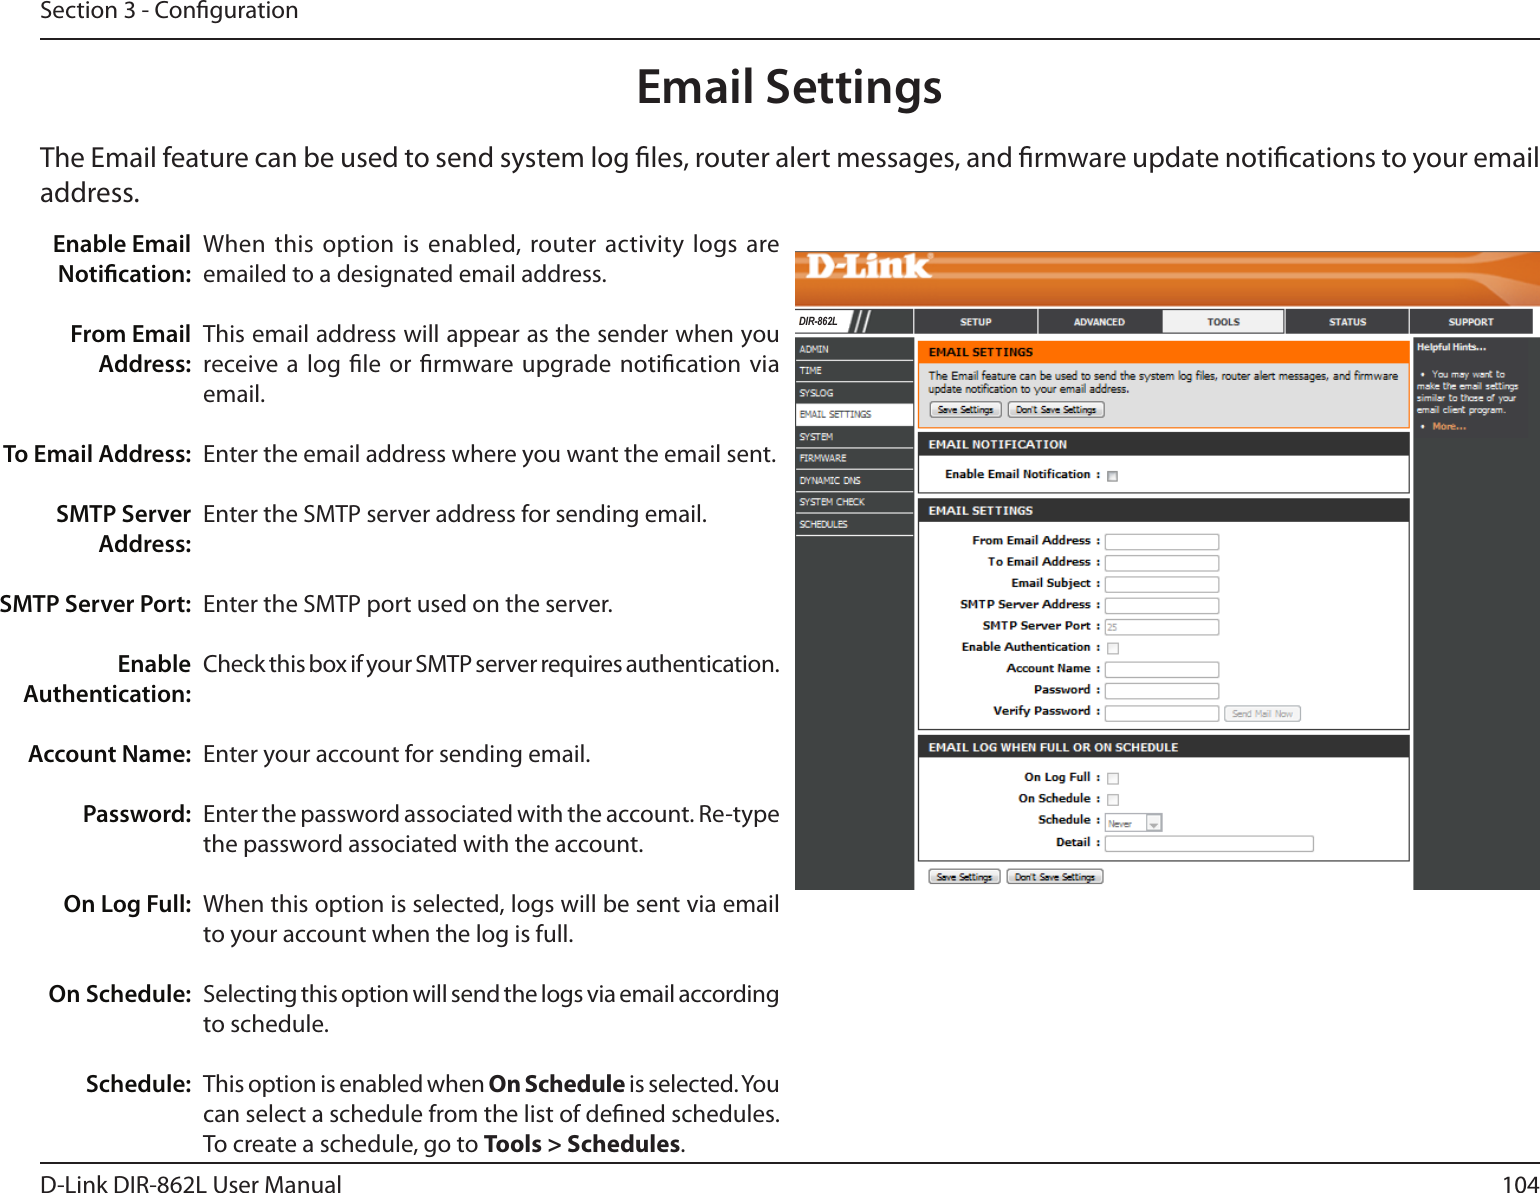 104D-Link DIR-862L User ManualSection 3 - CongurationEmail SettingsThe Email feature can be used to send system log les, router alert messages, and rmware update notications to your email address. Enable Email Notication: From Email Address:To Email Address:SMTP Server Address:SMTP Server Port:Enable Authentication:Account Name:Password:On Log Full:On Schedule:Schedule:When this option is enabled, router activity logs are emailed to a designated email address.This email address will appear as the sender when you receive a log le or rmware upgrade notication via email.Enter the email address where you want the email sent. Enter the SMTP server address for sending email. Enter the SMTP port used on the server.Check this box if your SMTP server requires authentication. Enter your account for sending email.Enter the password associated with the account. Re-type the password associated with the account.When this option is selected, logs will be sent via email to your account when the log is full.Selecting this option will send the logs via email according to schedule.This option is enabled when On Schedule is selected. You can select a schedule from the list of dened schedules. To create a schedule, go to Tools &gt; Schedules.DIR-862L